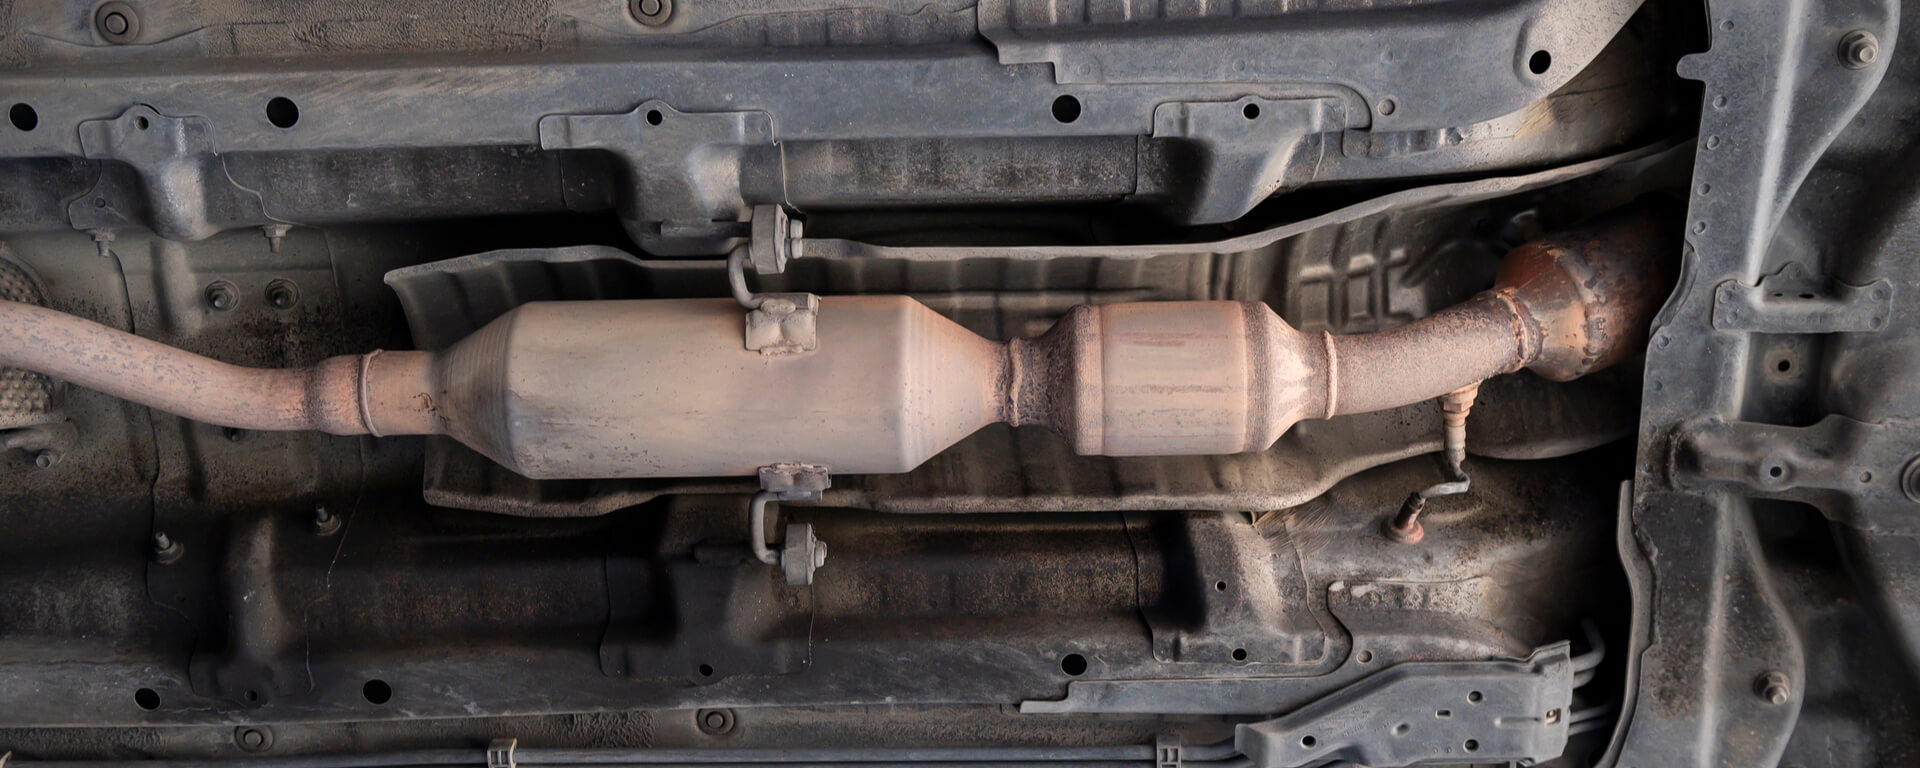 catalytic converter theft on the rise